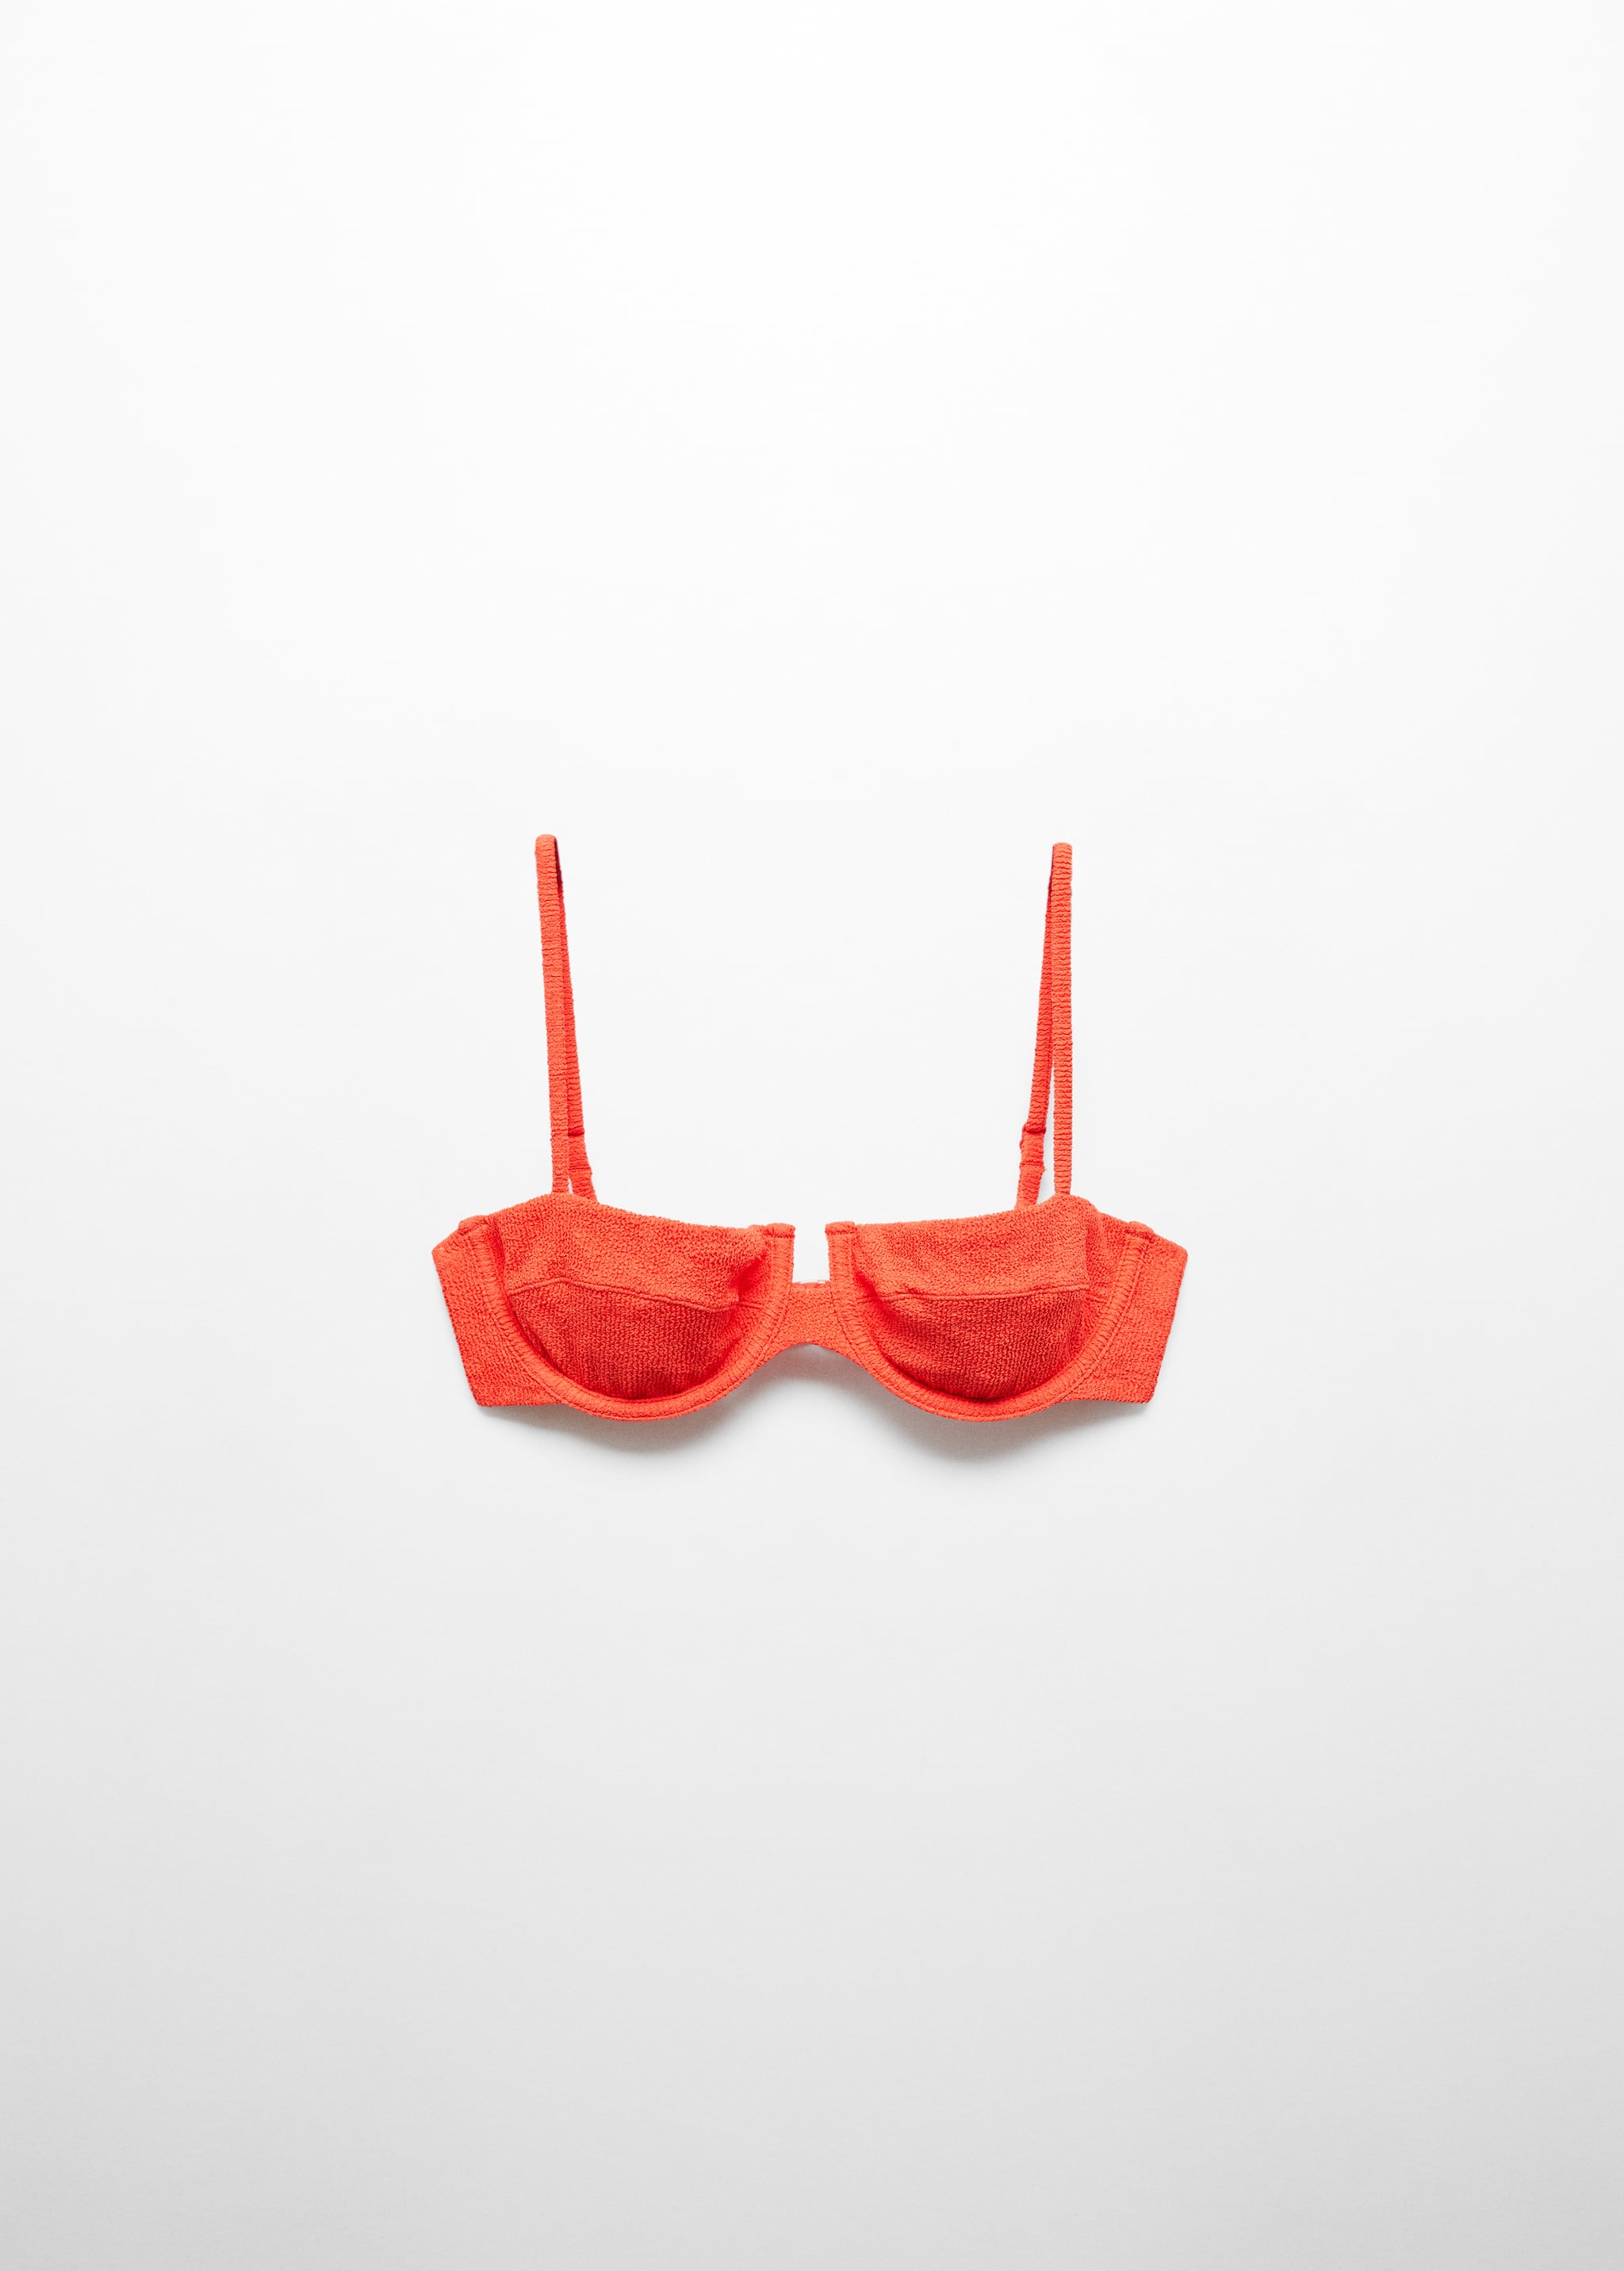 Underwired bikini top - Article without model